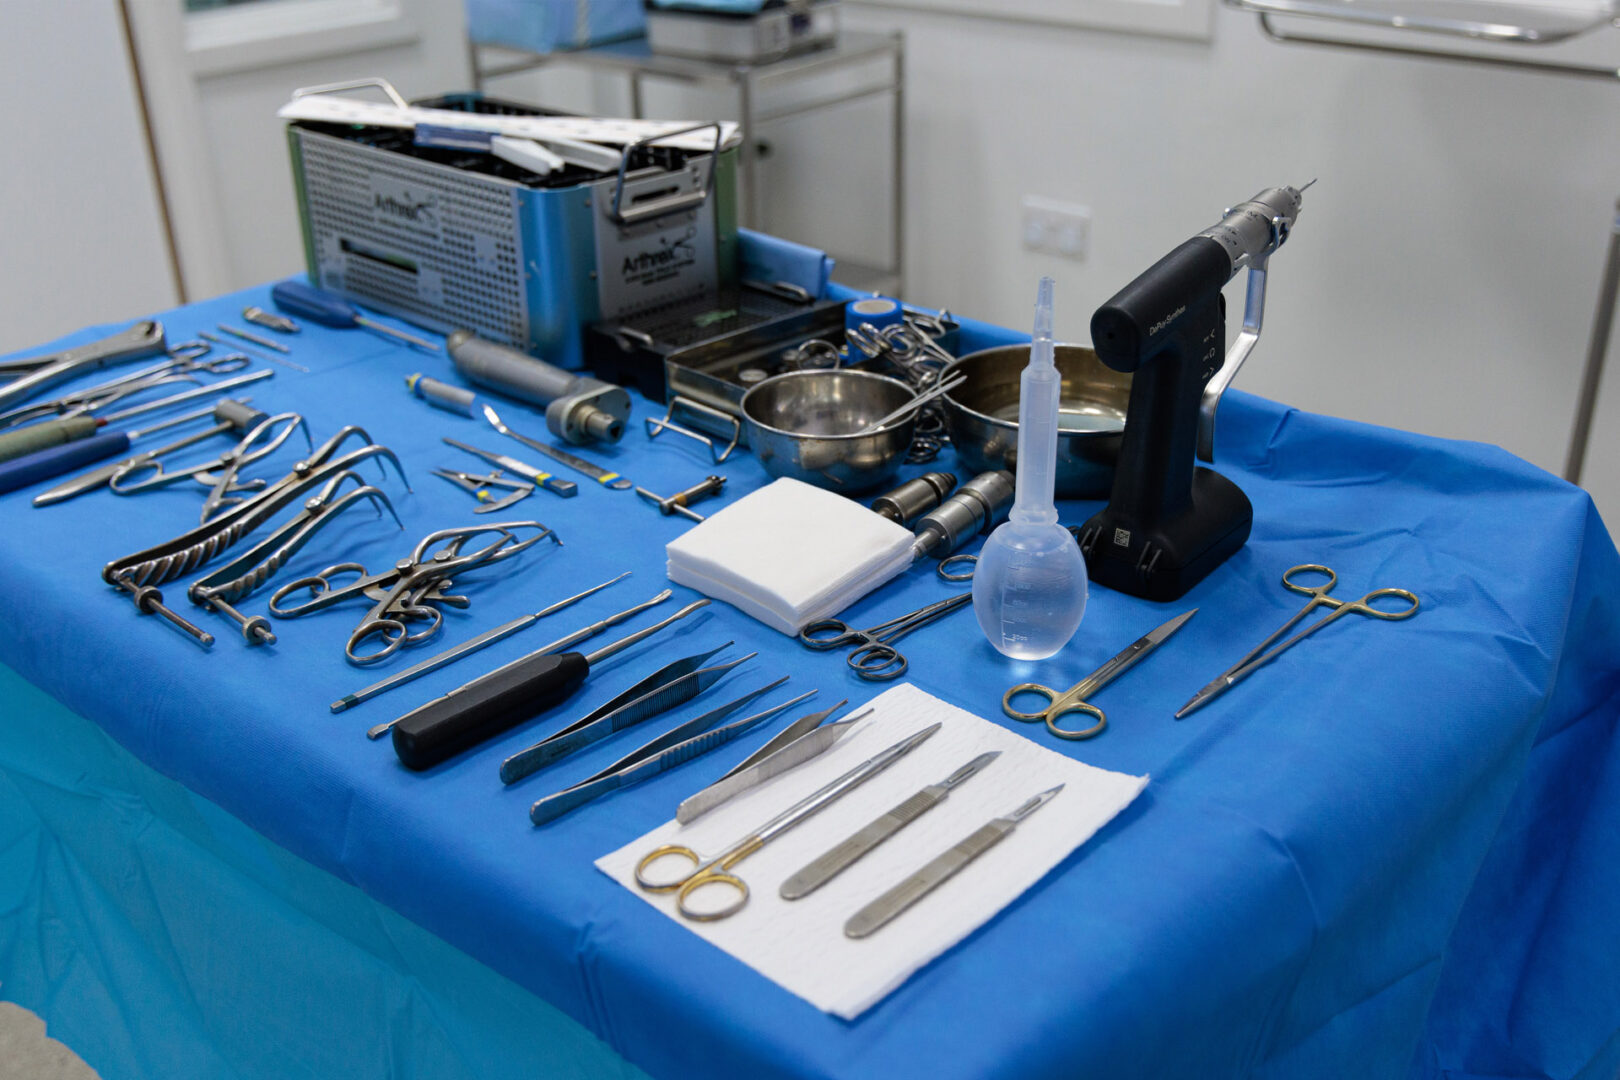 Veterinary surgical kit laid out in theatre